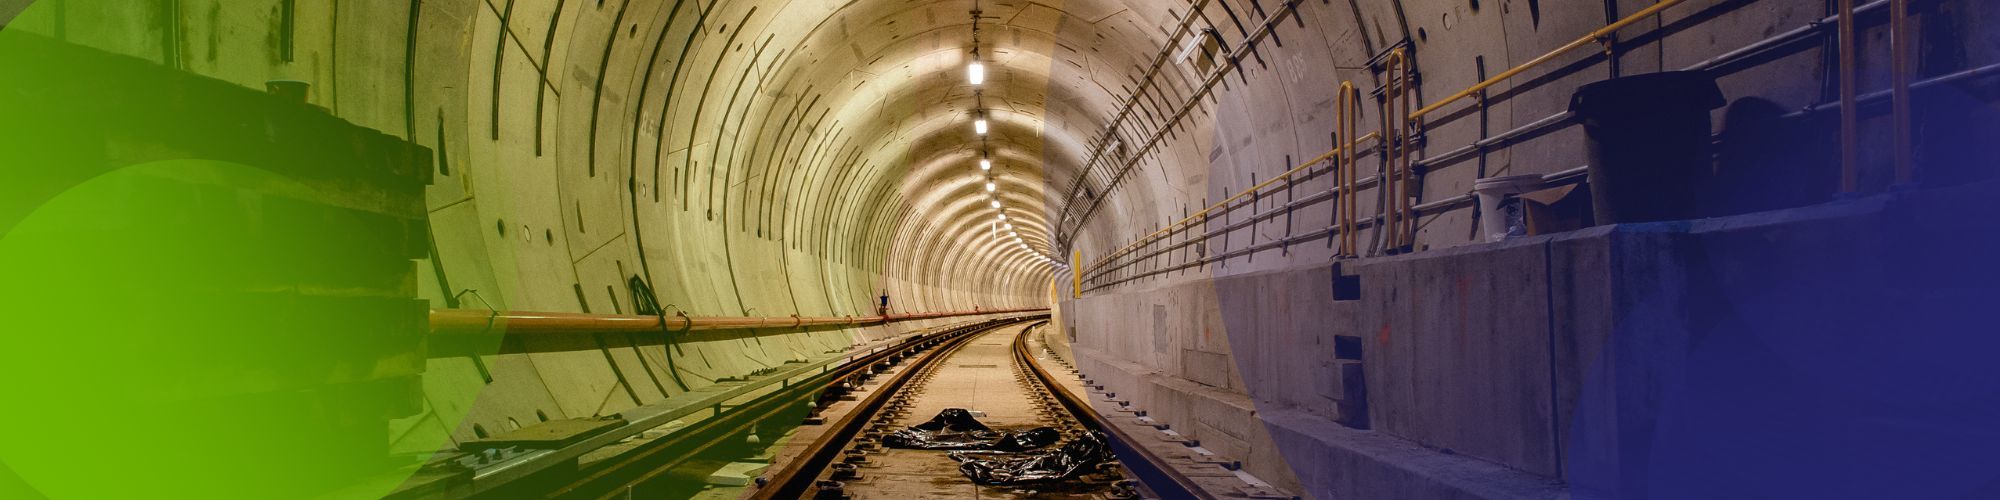 Network Rail Installs 11,000-tonne Tunnel on East Coast Main Line to Improve Efficiency and Reliability